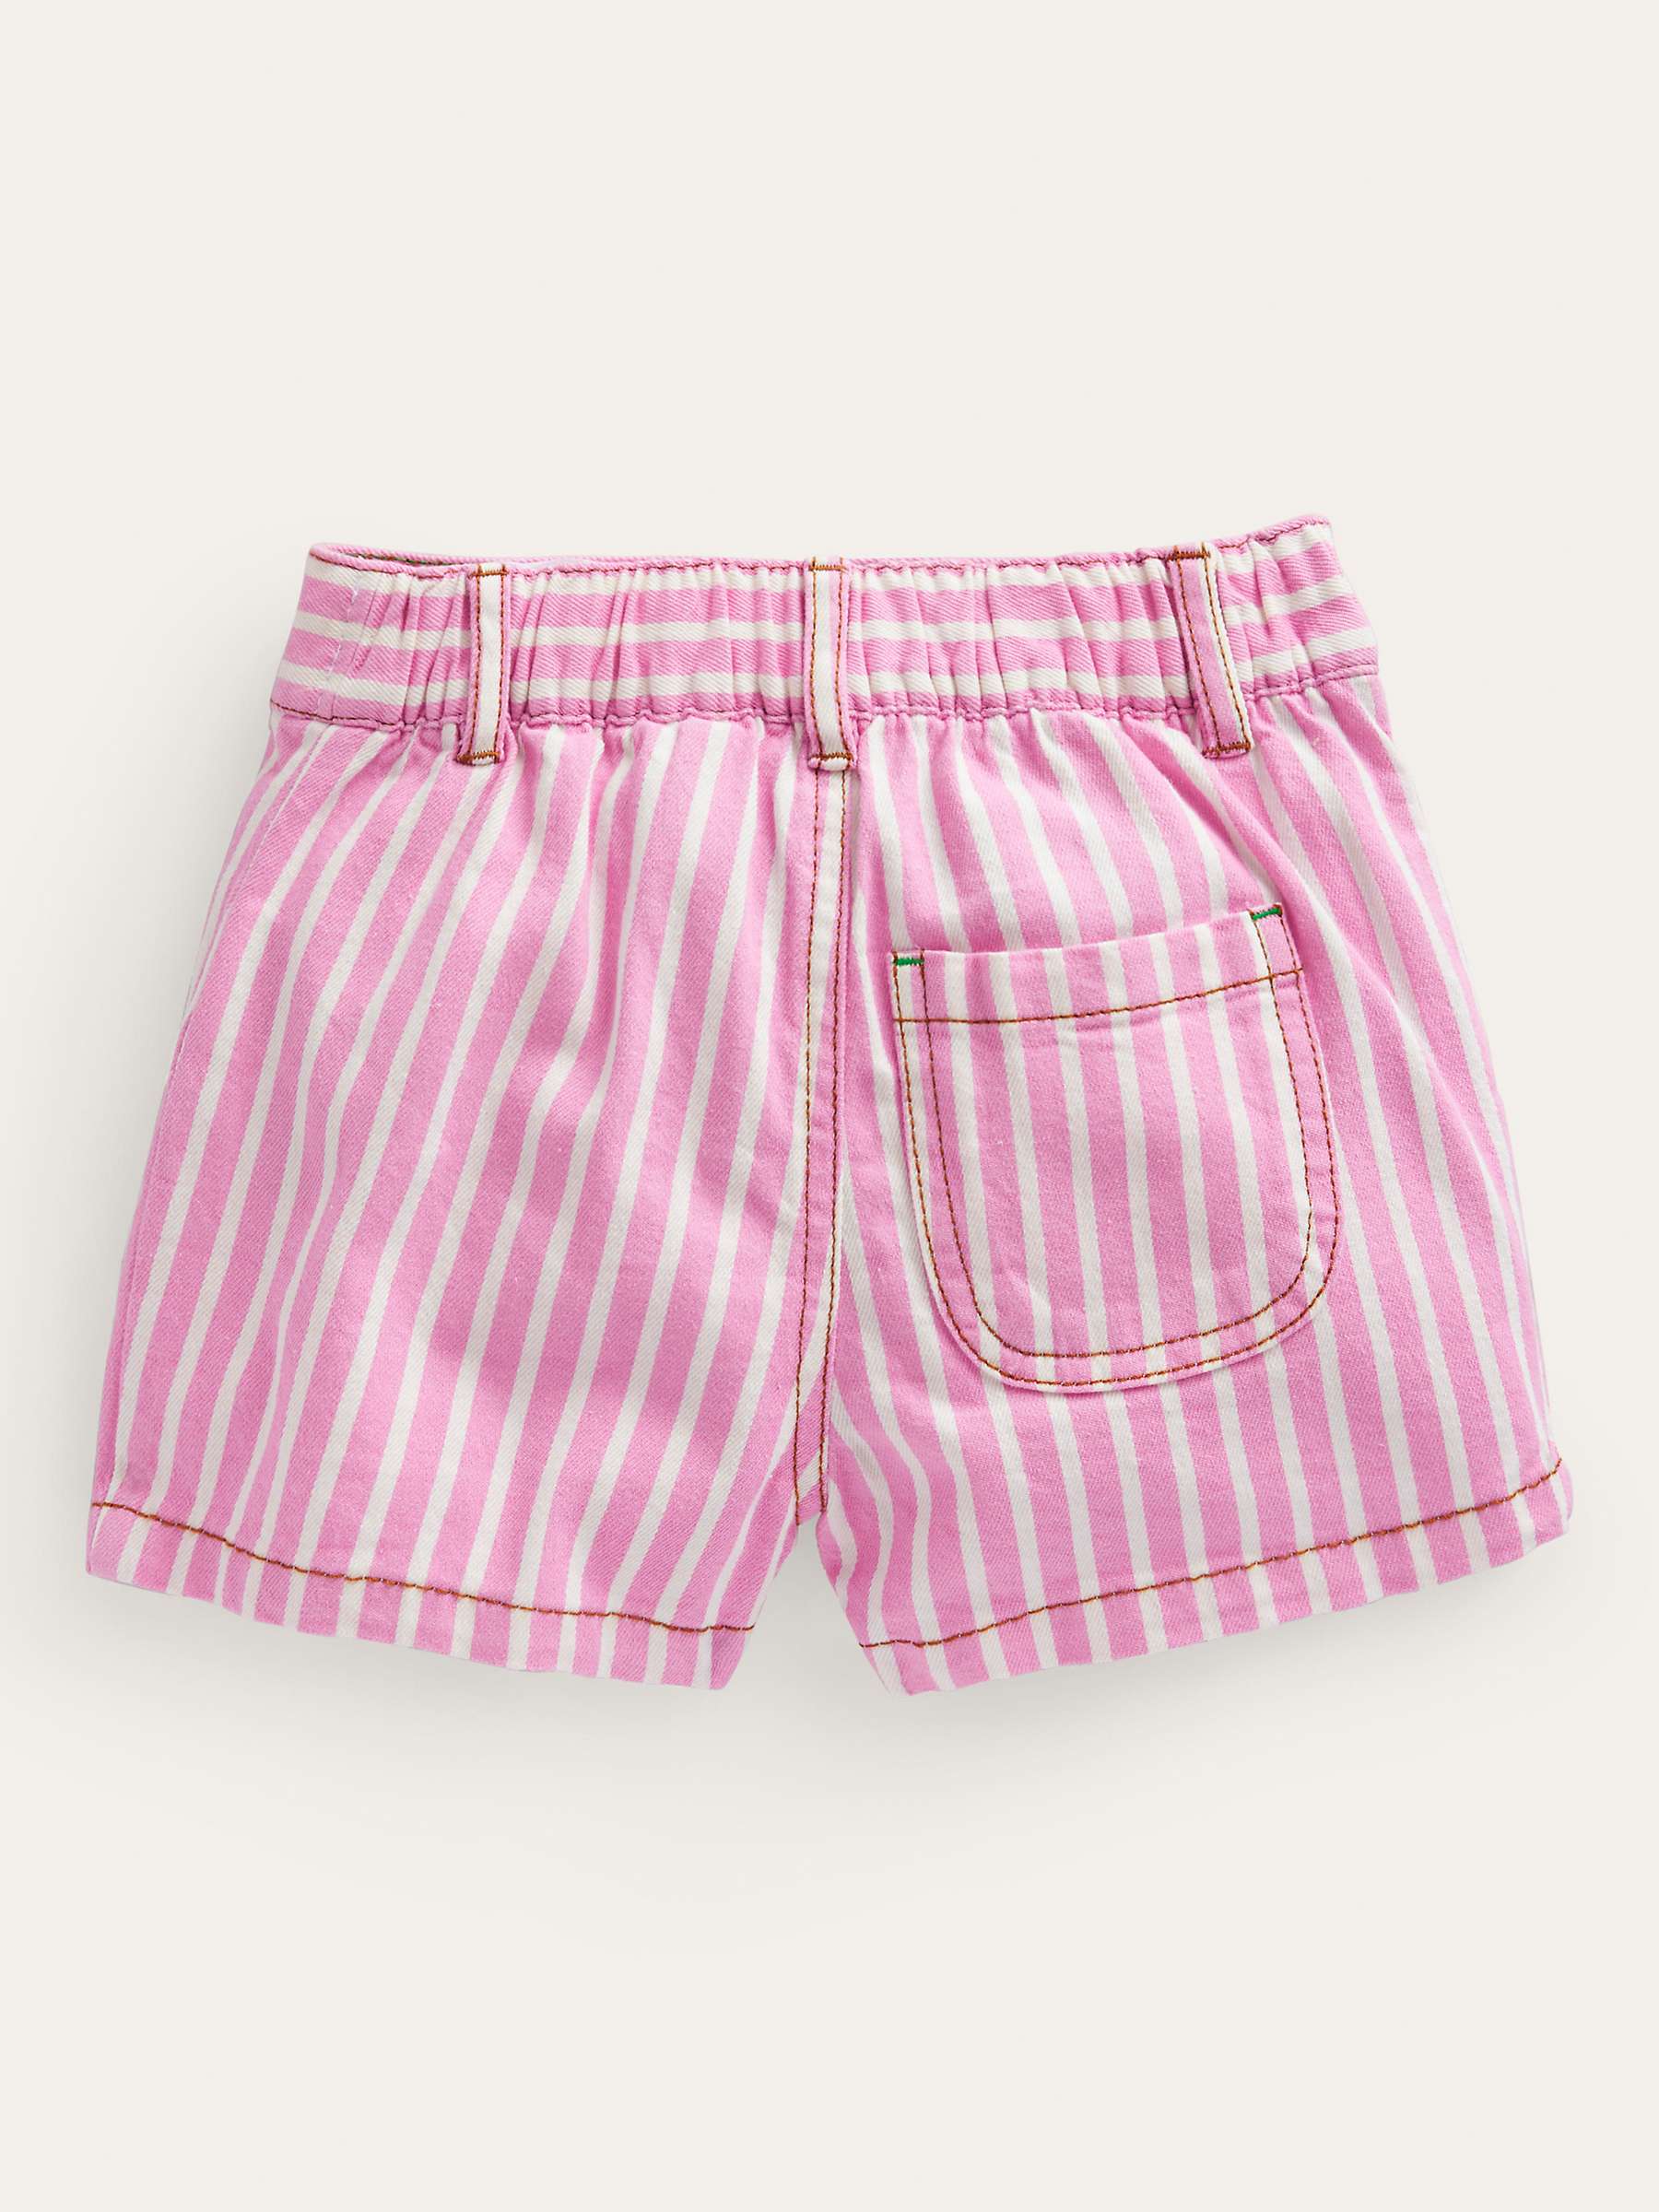 Buy Mini Boden Girl's Tulip Patch Pocket Shorts, Pink/Ivory Online at johnlewis.com